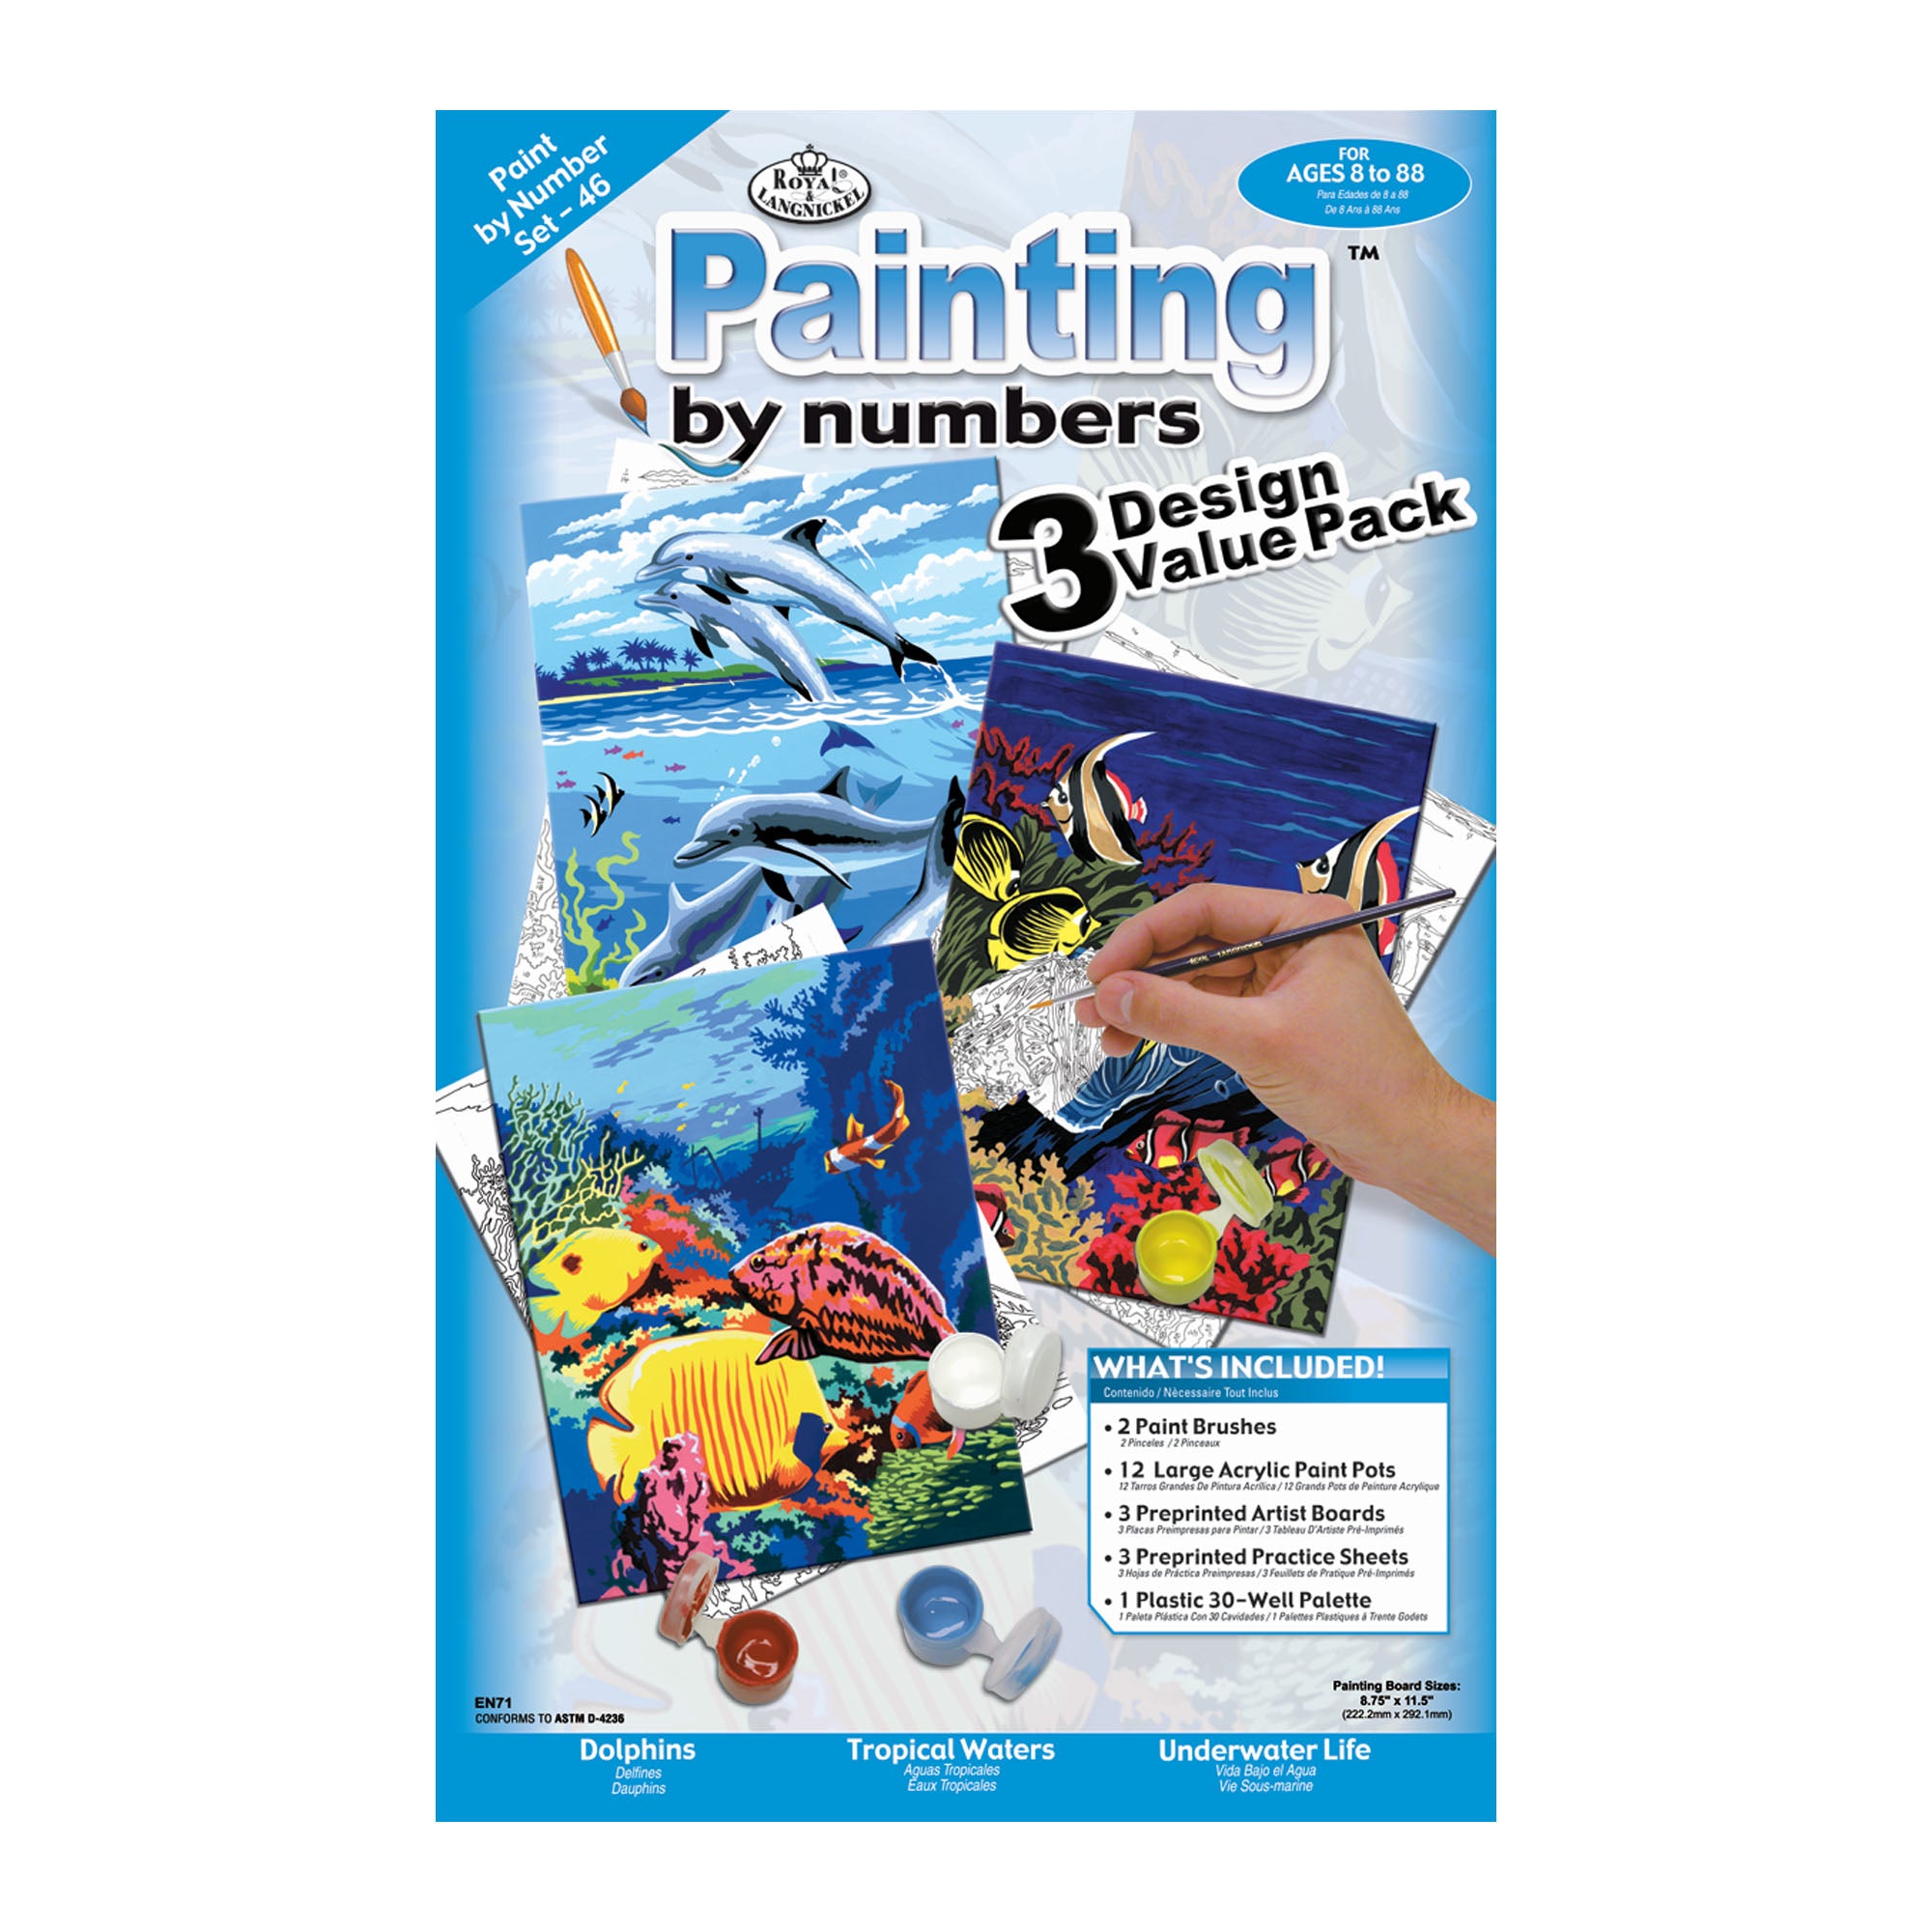 Sealife paint by numbers kit, set of 3